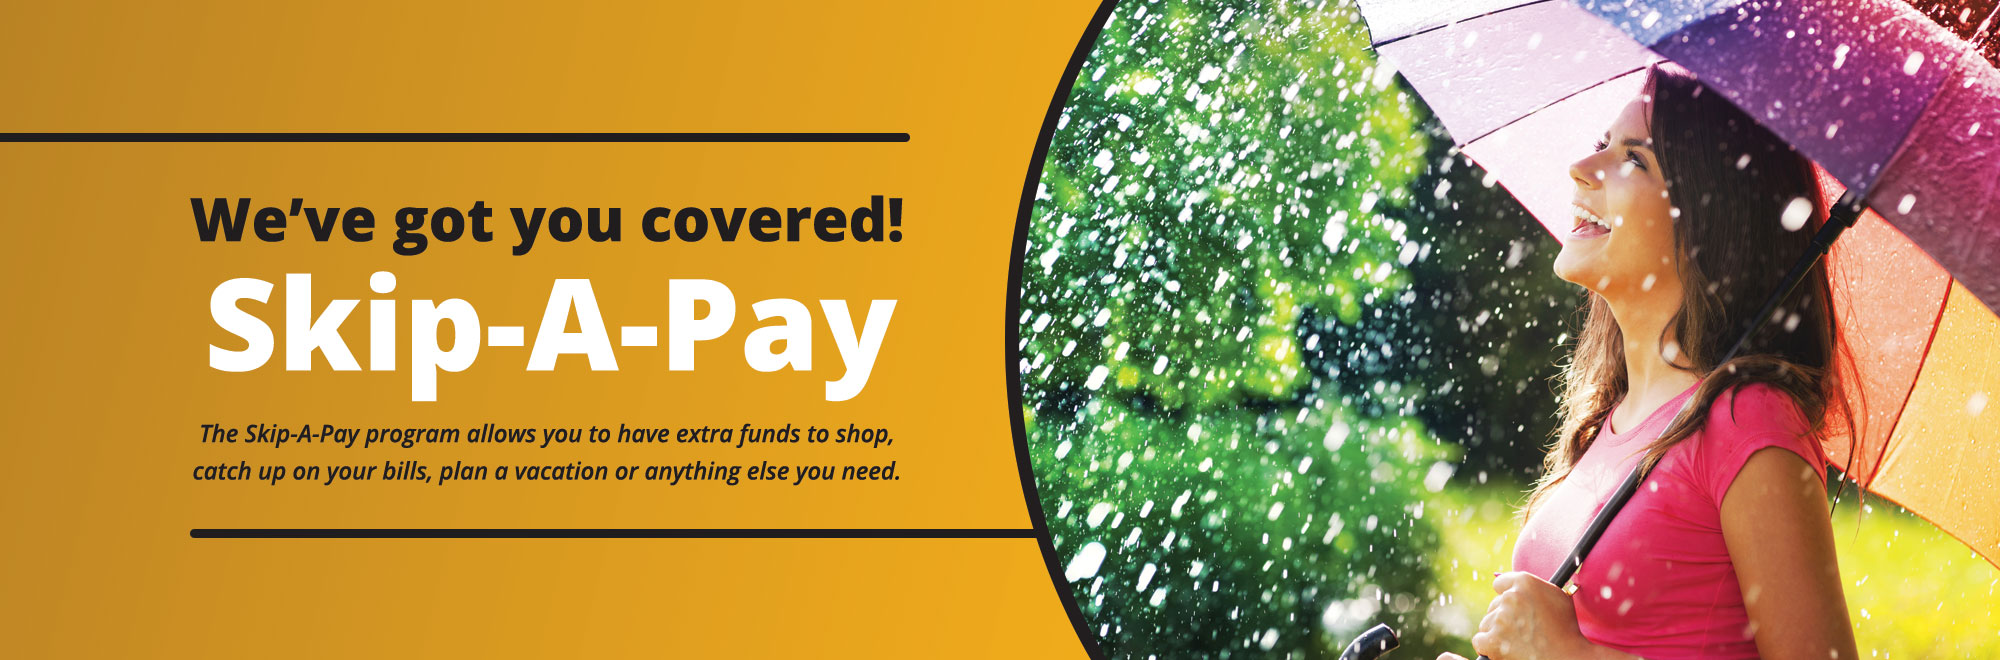 We've got you covered with Skip-A-Pay. Have extra funds to shop, pay bills, plan a vacation or anything else you need.